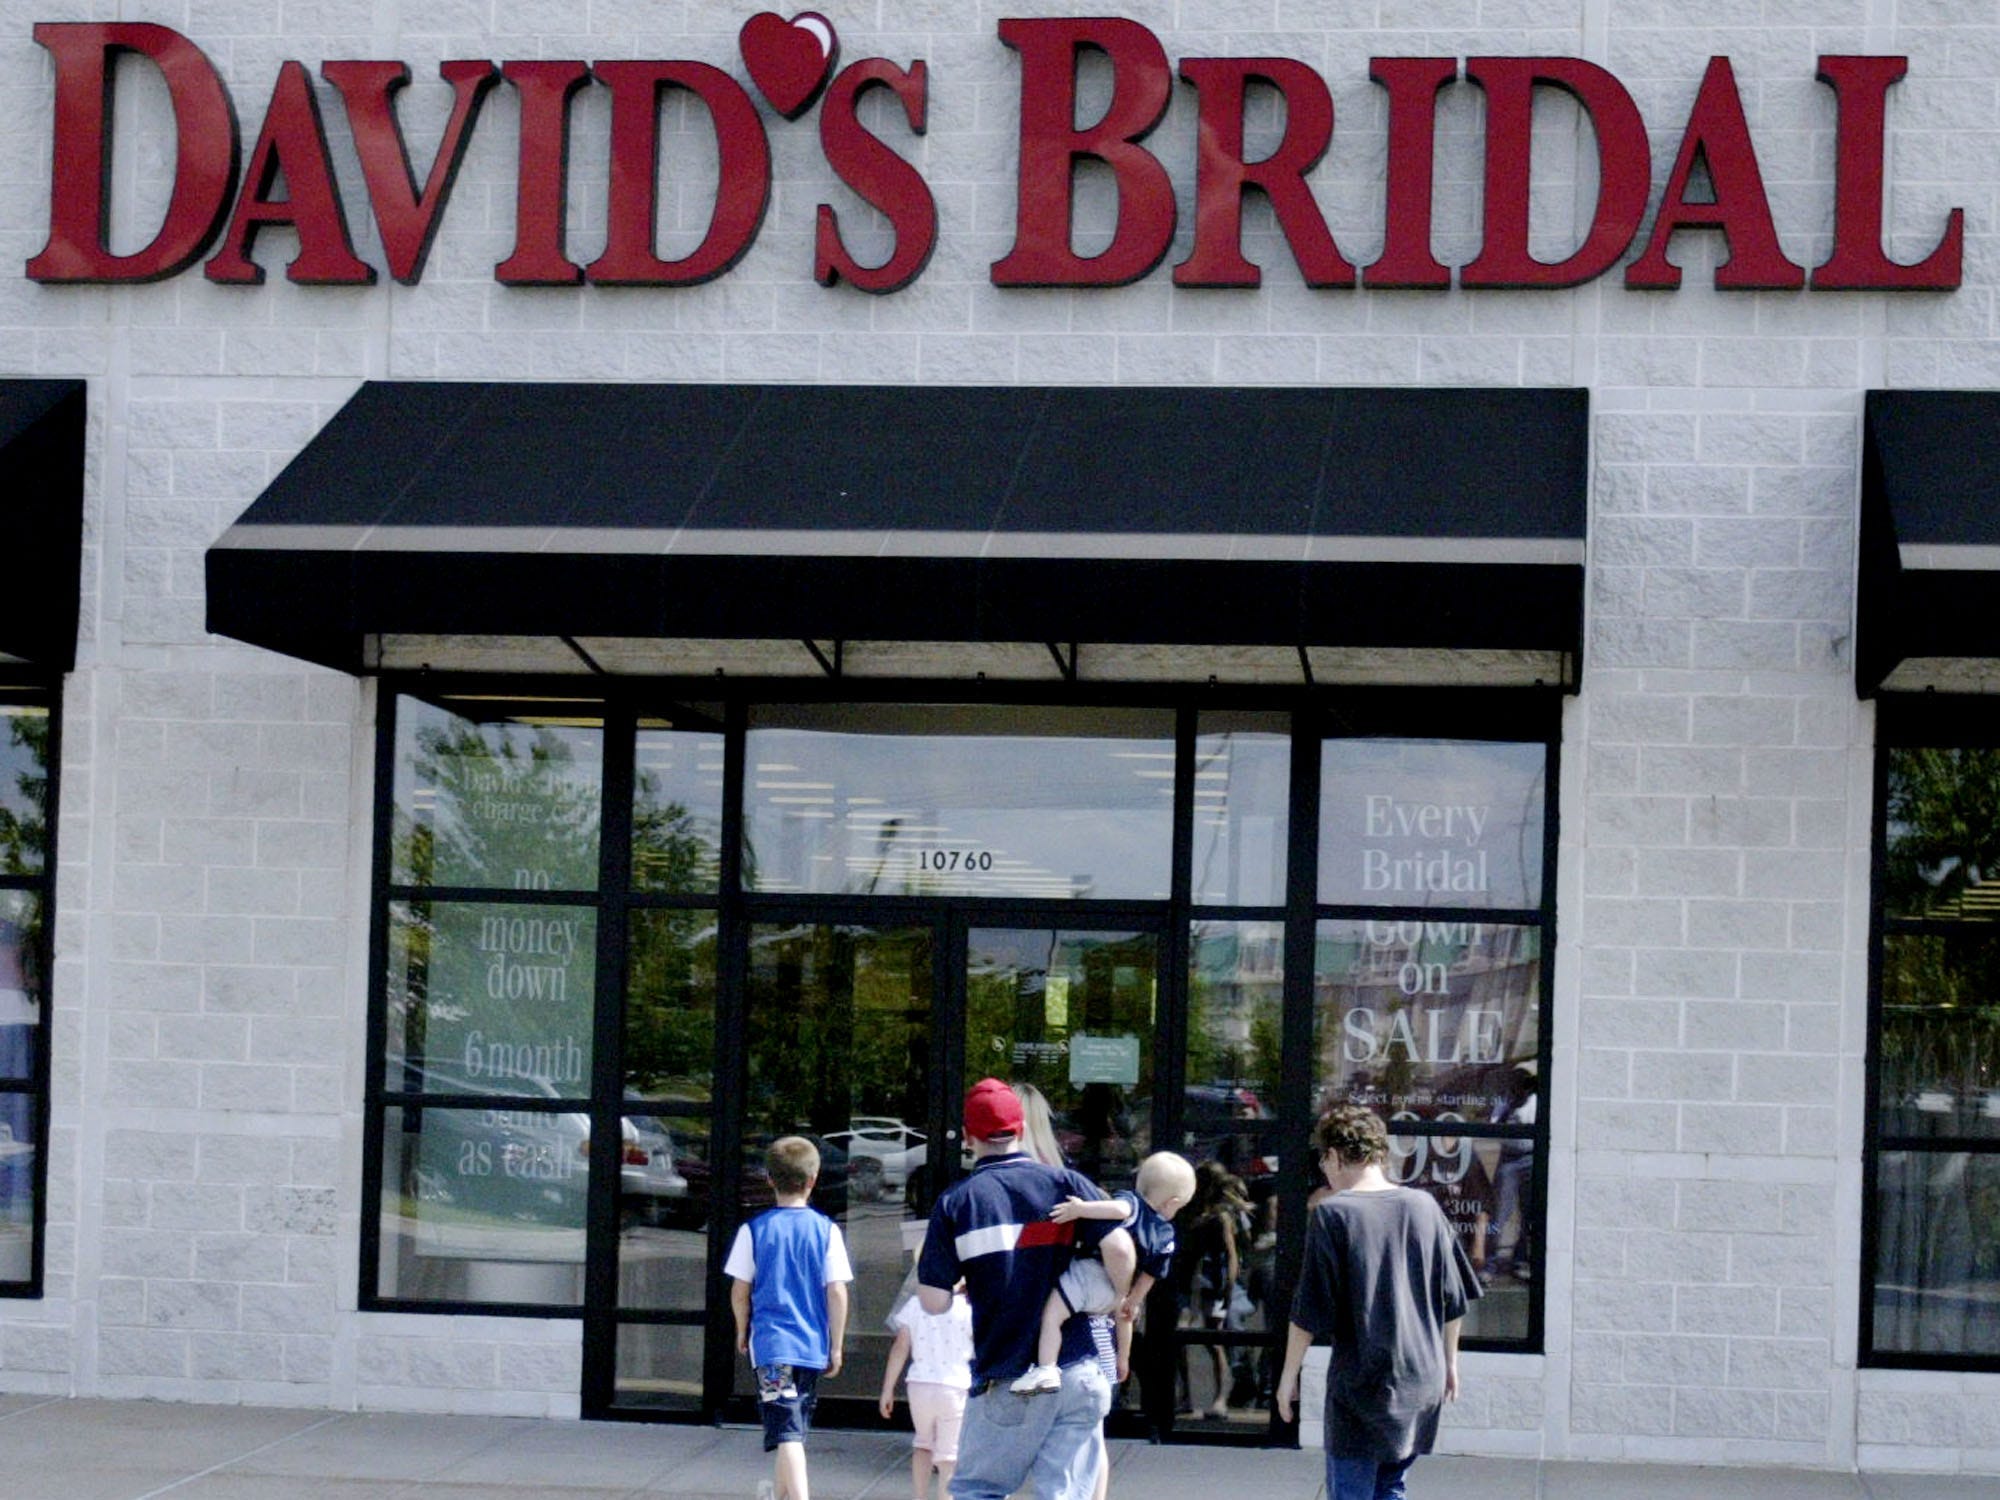 <p>David's Bridal is laying off more than 9,000 workers across the US, according to a <a href="https://www.dli.pa.gov/Individuals/Workforce-Development/warn/notices/Pages/April-2023.aspx" rel="noopener">WARN notice filed</a> with the Pennsylvania Department of Labor and Industry on April 14. </p><p>"We are evaluating our strategic options and a sale process is underway," David's Bridal spokesperson Laura McKeever told <a href="https://www.inquirer.com/business/retail/davids-bridal-layoffs-bankruptcy-sale-conshohocken-20230414.html">the Philadelphia Inquirer</a>. "At this time, there are no updates to share."</p><p>The company is considering filing for bankruptcy in the near future, according to an April 7 report from <a href="https://www.nytimes.com/2023/04/07/business/dealbook/davids-bridal-bankruptcy.html">the New York Times</a>. David's Bridal also filed for bankruptcy in 2018. </p>